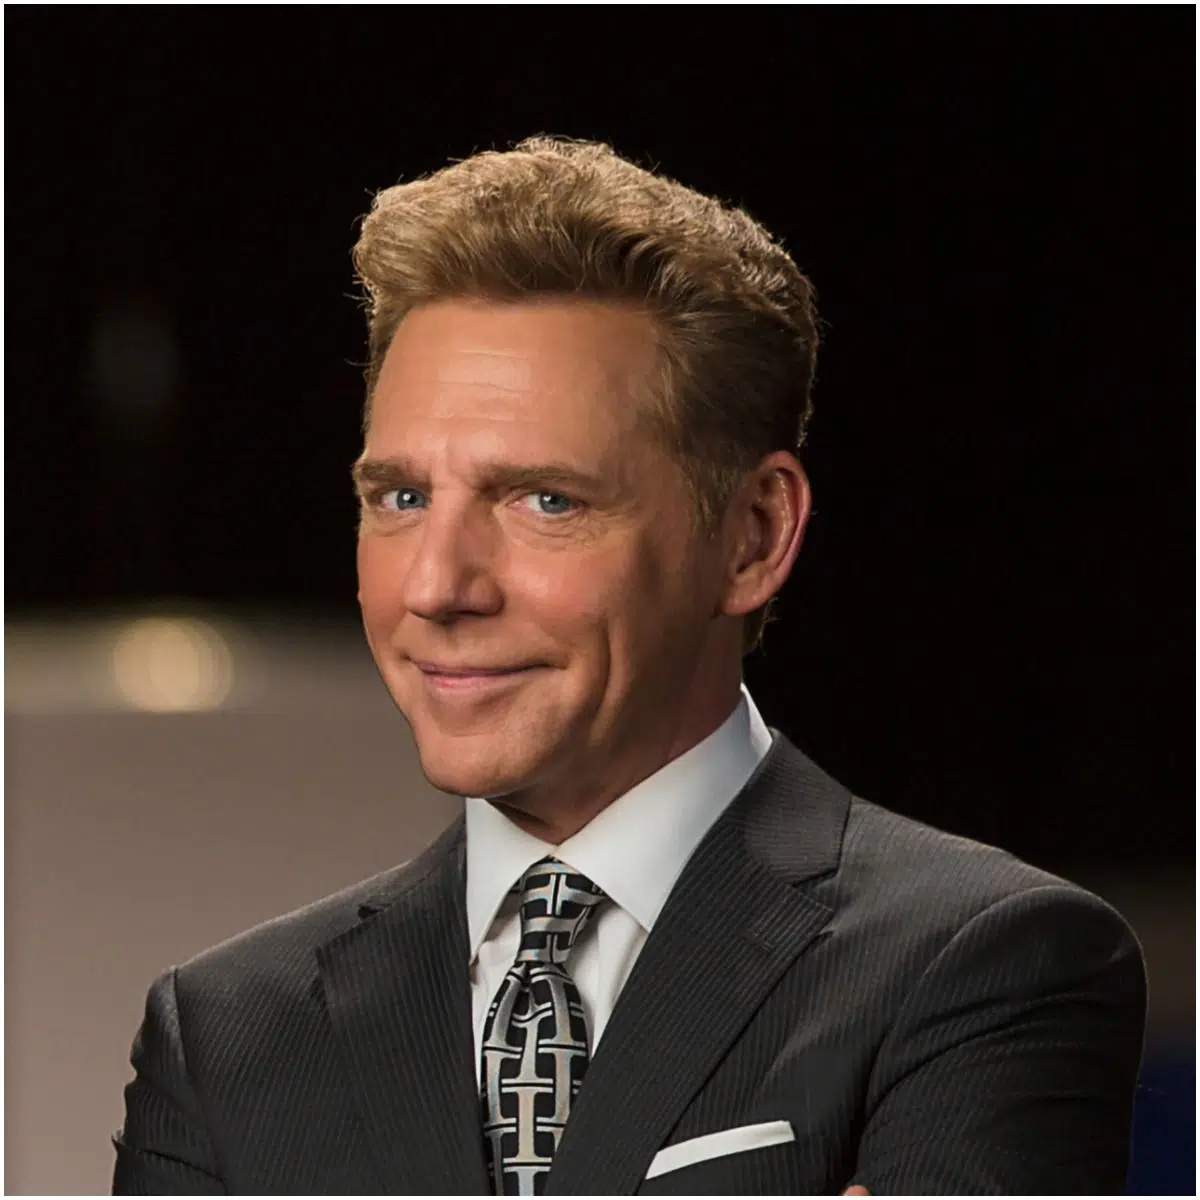 what is the net worth of David Miscavige